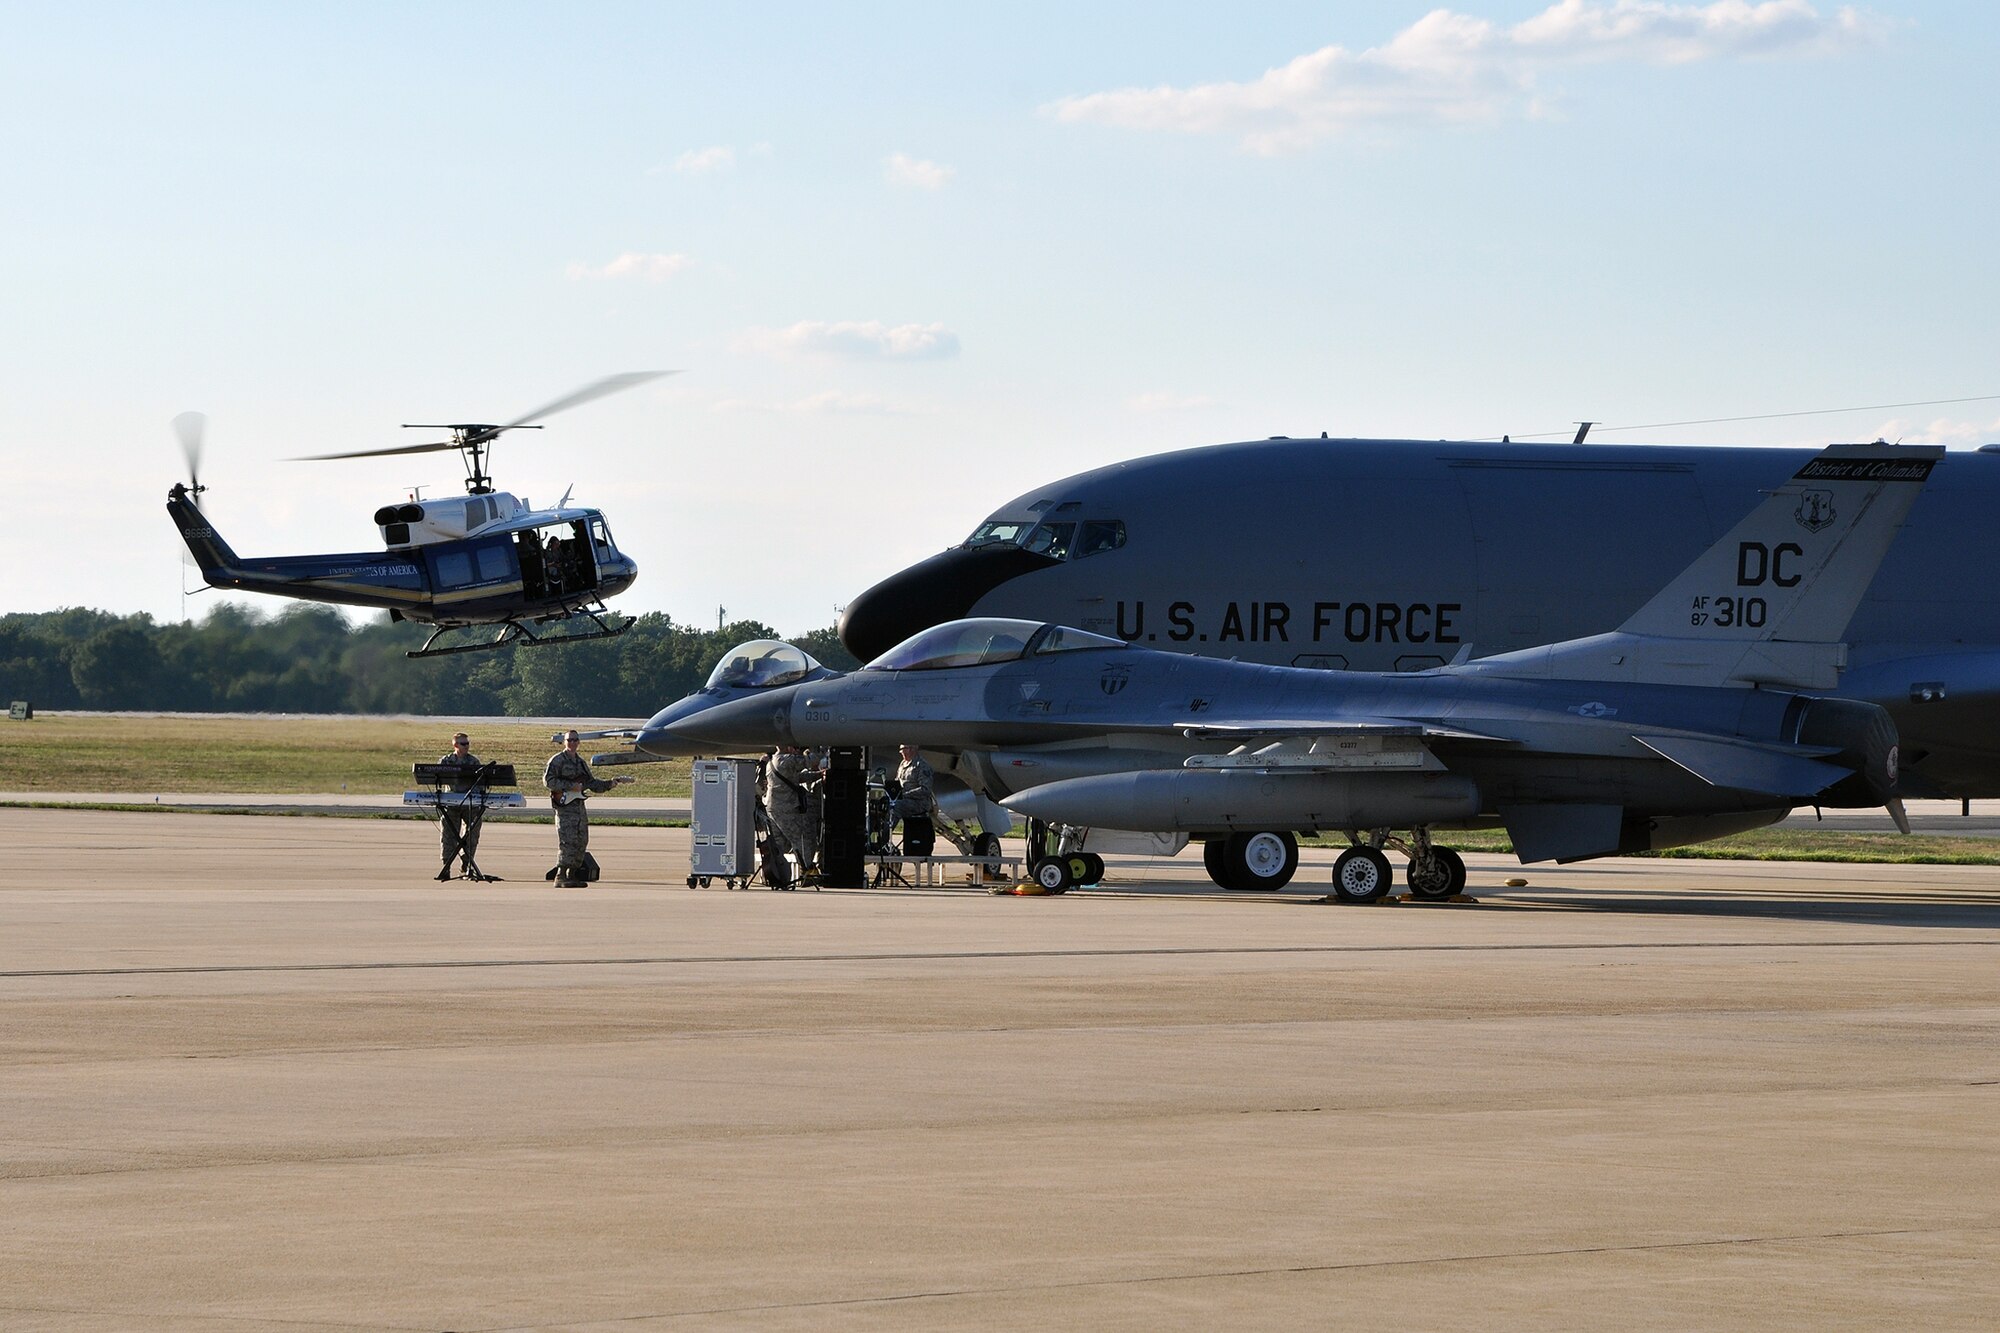 A 1st Helicopter Squadron UH-1N Huey performs a flyby of a production set to capture aerial videography of an up-and-coming music video for the U.S. Air Force band Max Impact on the Joint Base Andrews flightline Aug. 26, 2015. A 459th Air Refueling Wing KC-135R Stratotanker and 113th Wing F-16 Fighting Falcon helped set the stage for the band during the media event. (U.S. Air Force photo/Kat Lynn Justen)